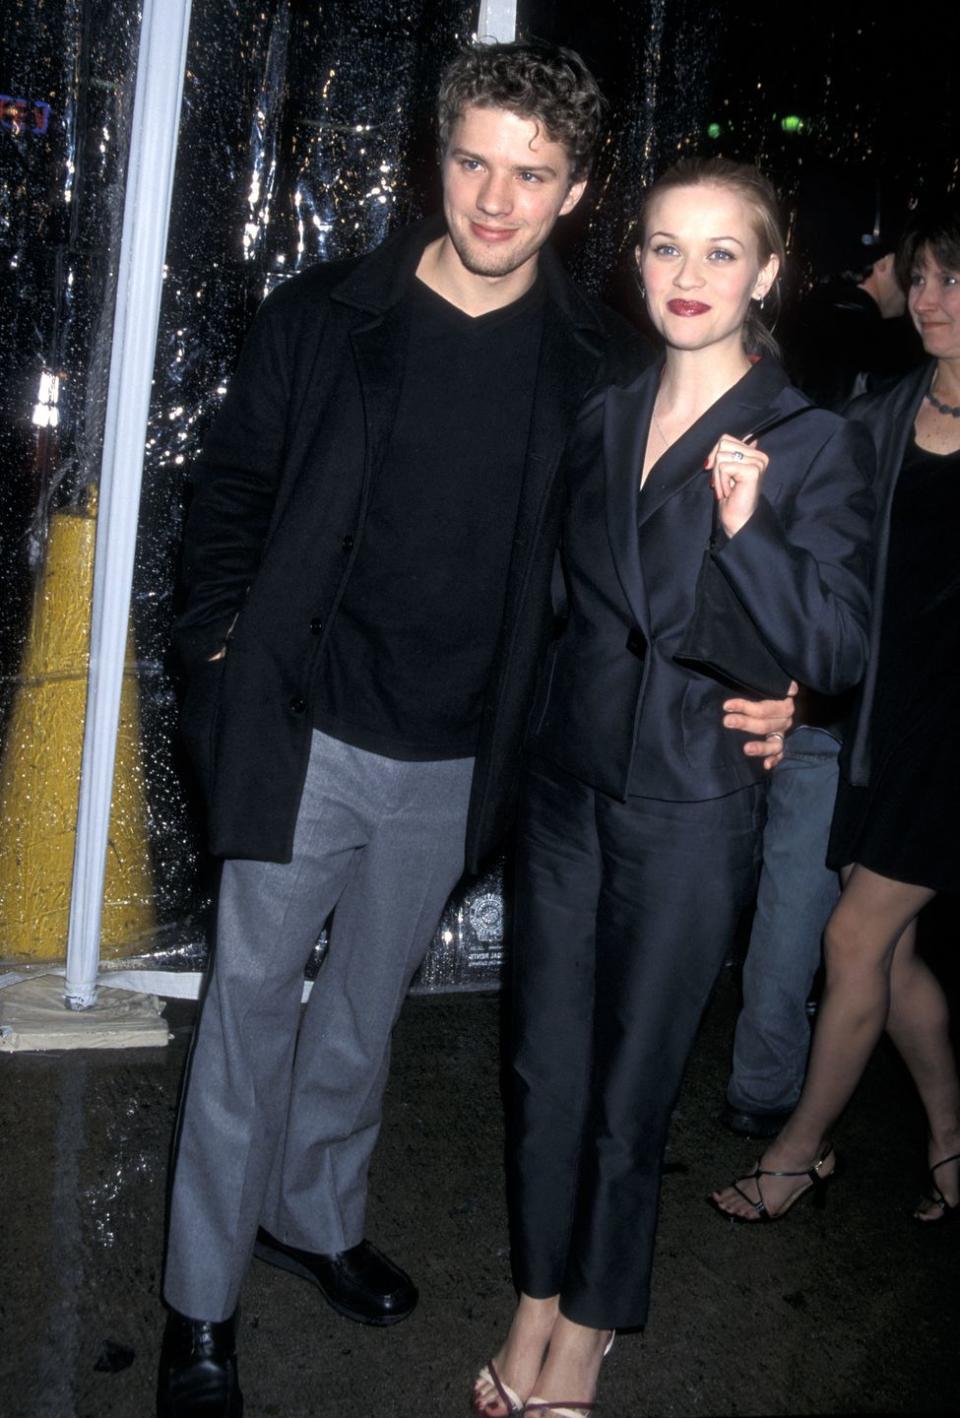 Then: Reese Witherspoon and Ryan Phillippe